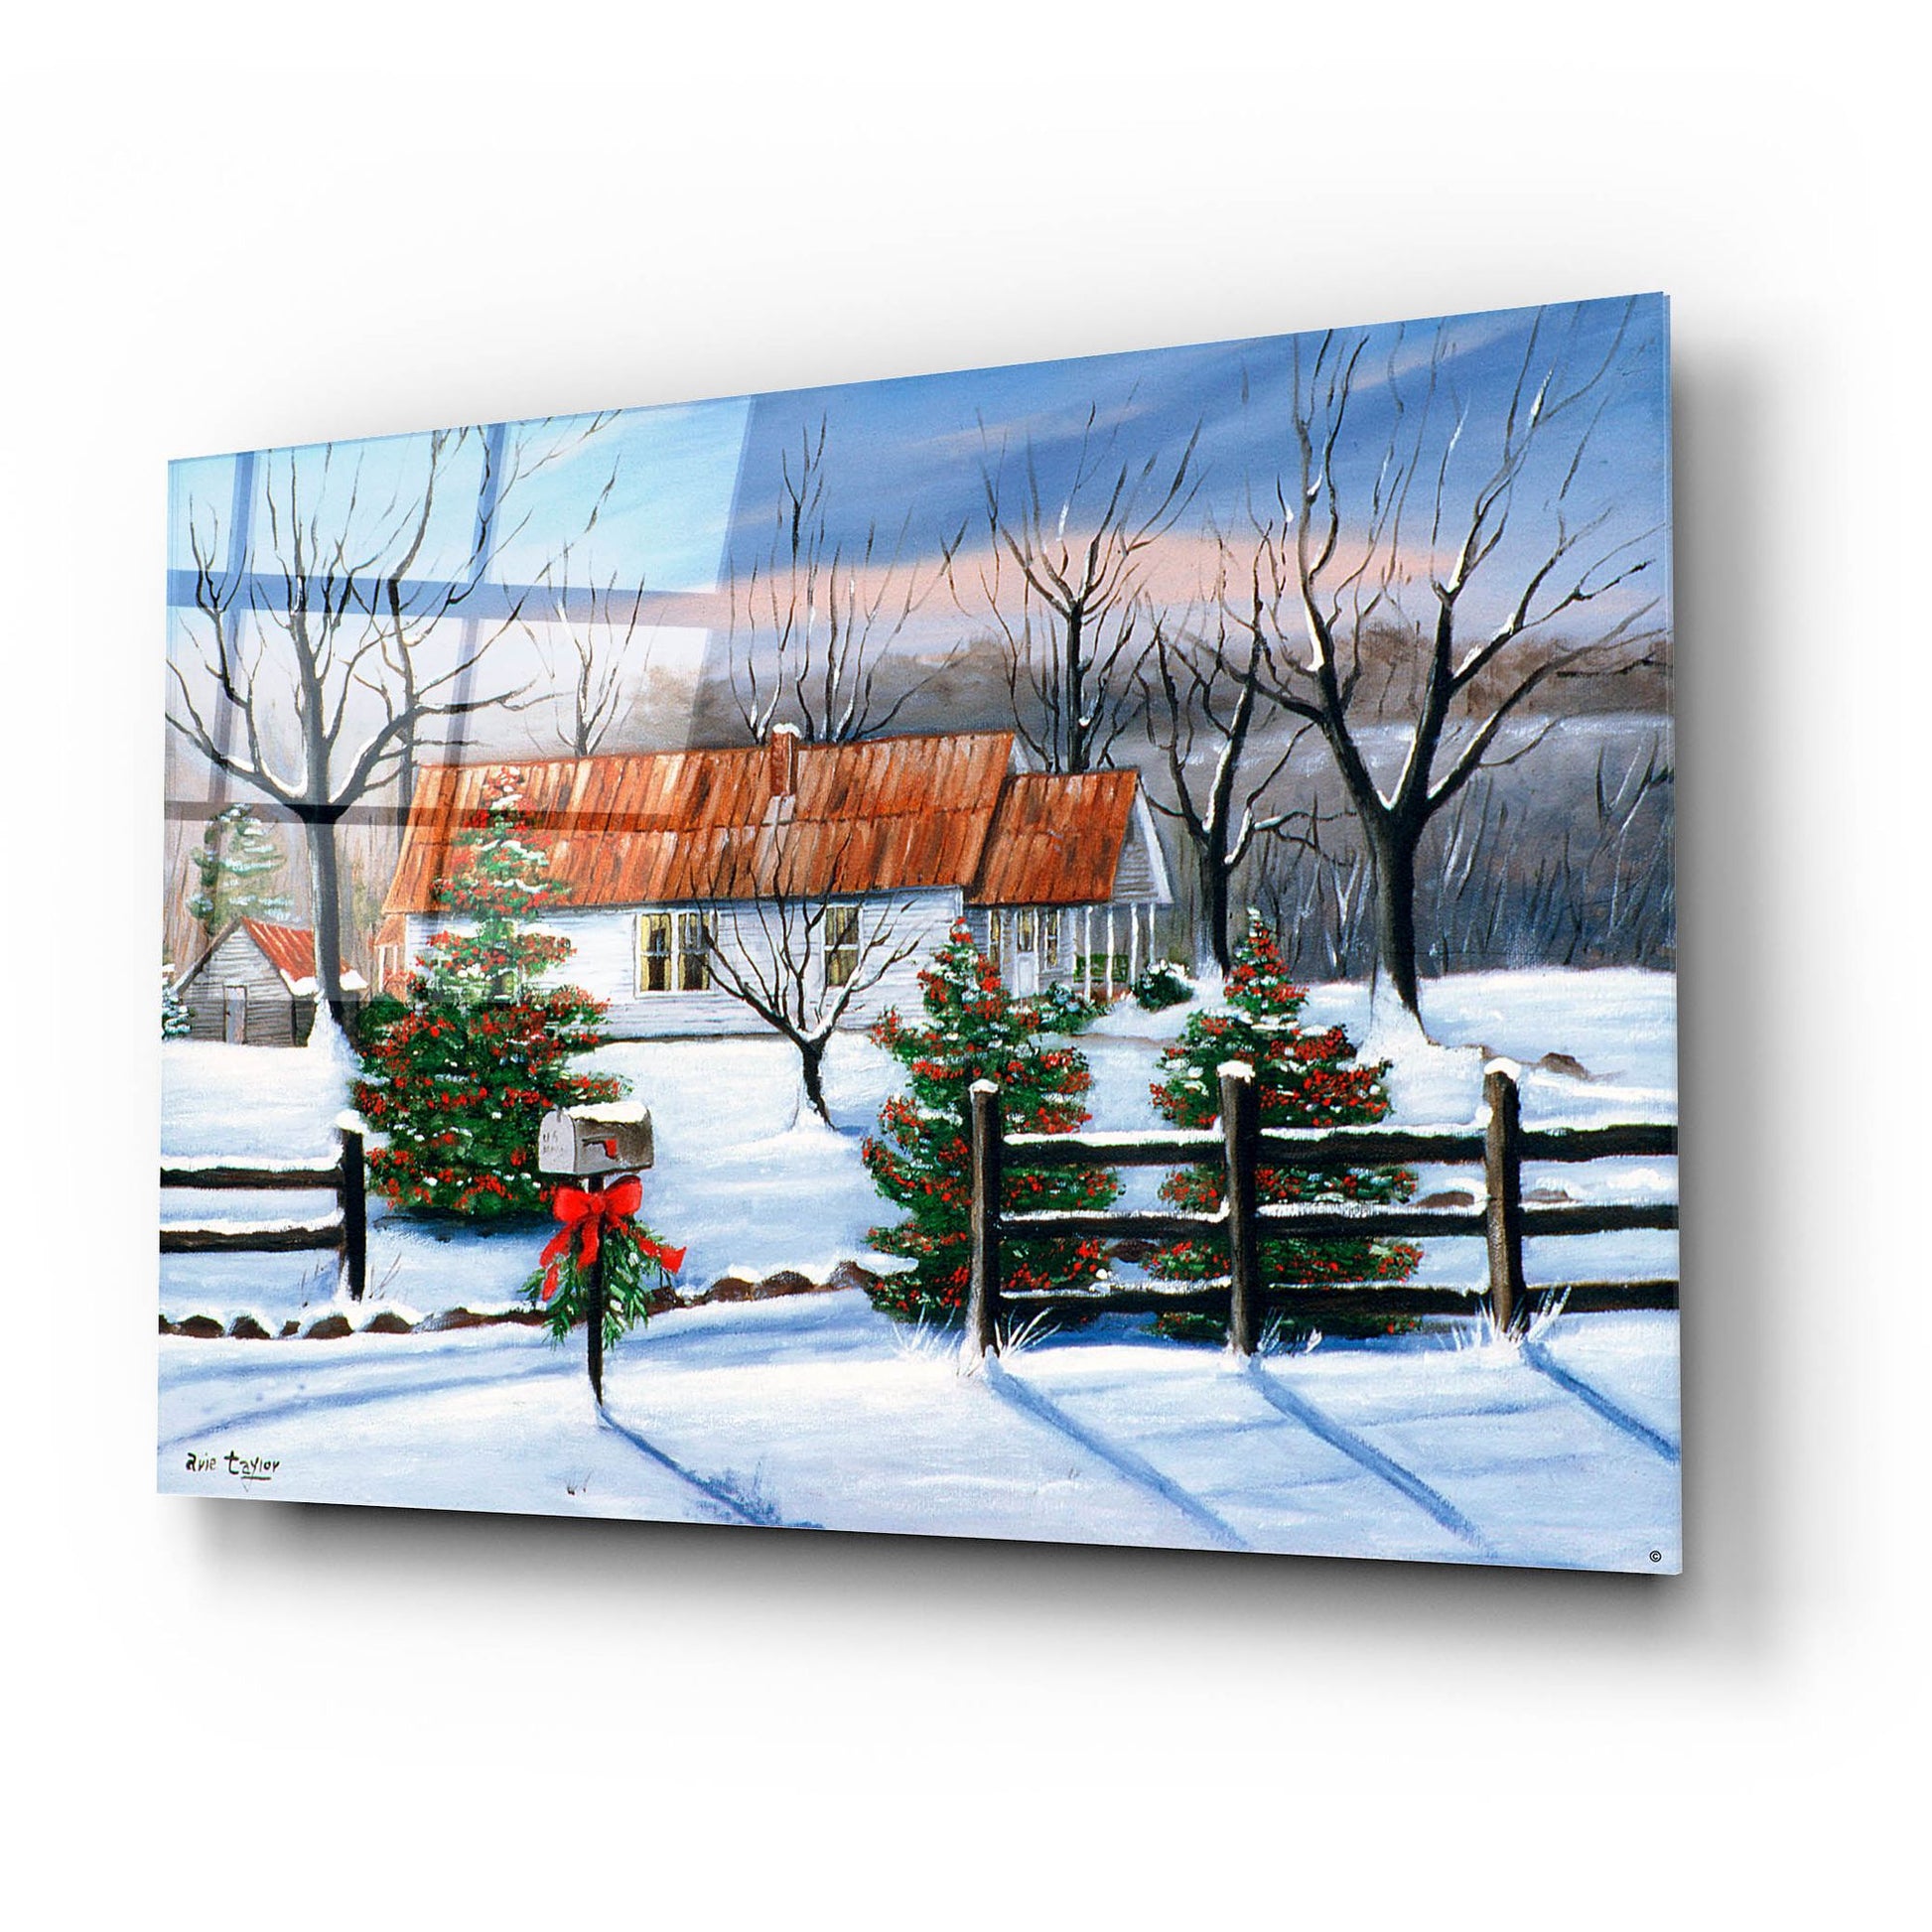 Epic Art 'Mom and Dad's at Christmas' by Arie Reinhardt Taylor, Acrylic Glass Wall Art,24x16